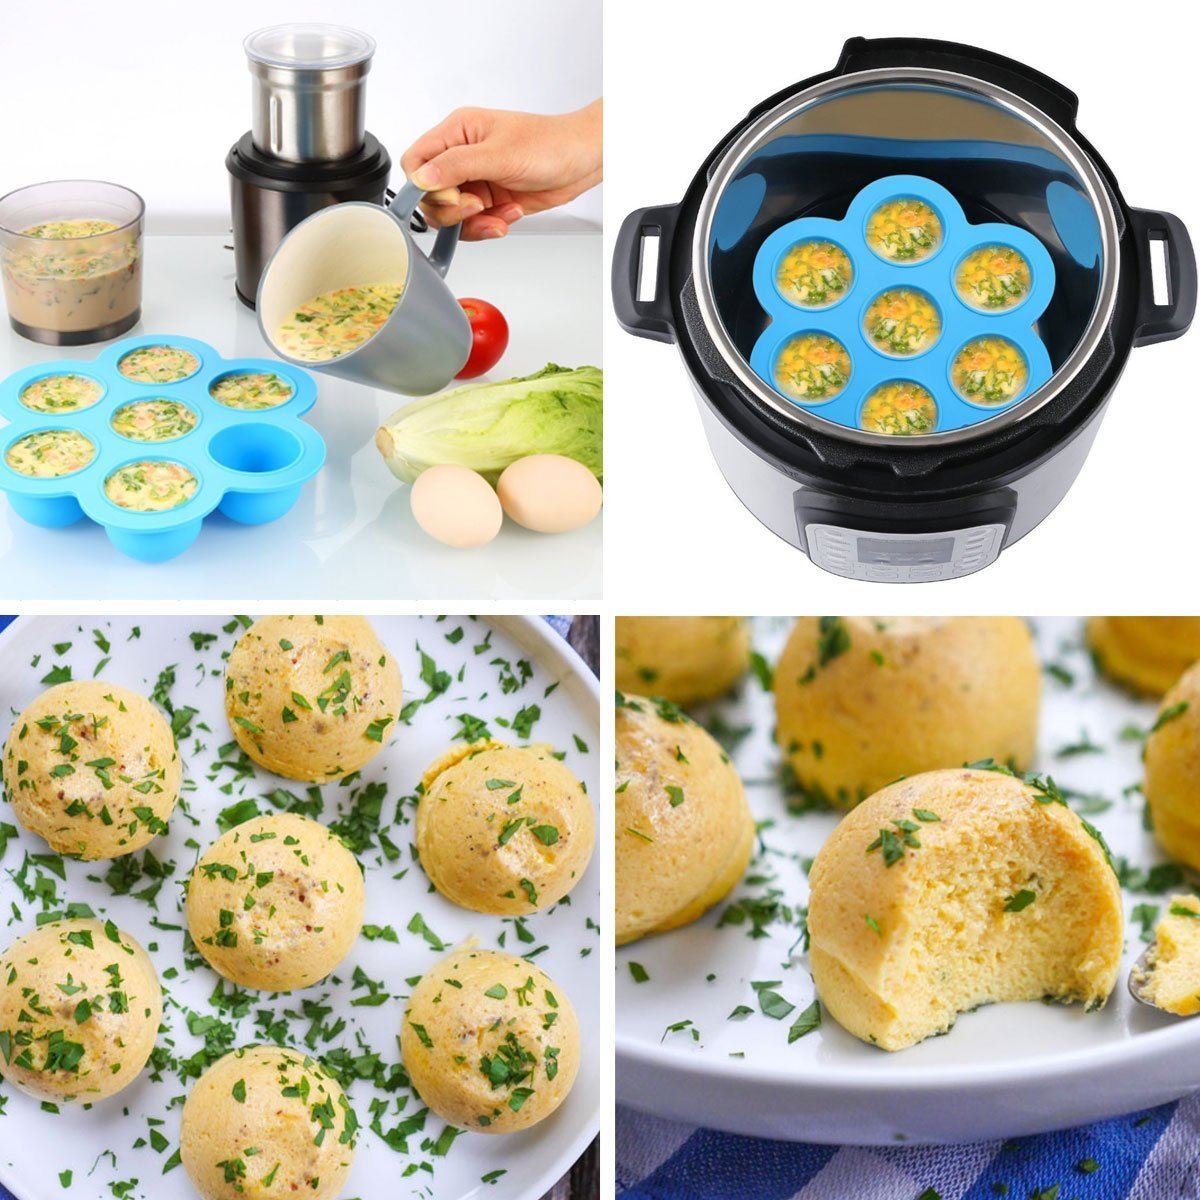 Made-in-USA - Popfex Silicone Egg Bites Mold for Instant Pot Accessories - Fits Instant Pot 5,6,8 qt Pressure Cooker - Reusable Storage Container